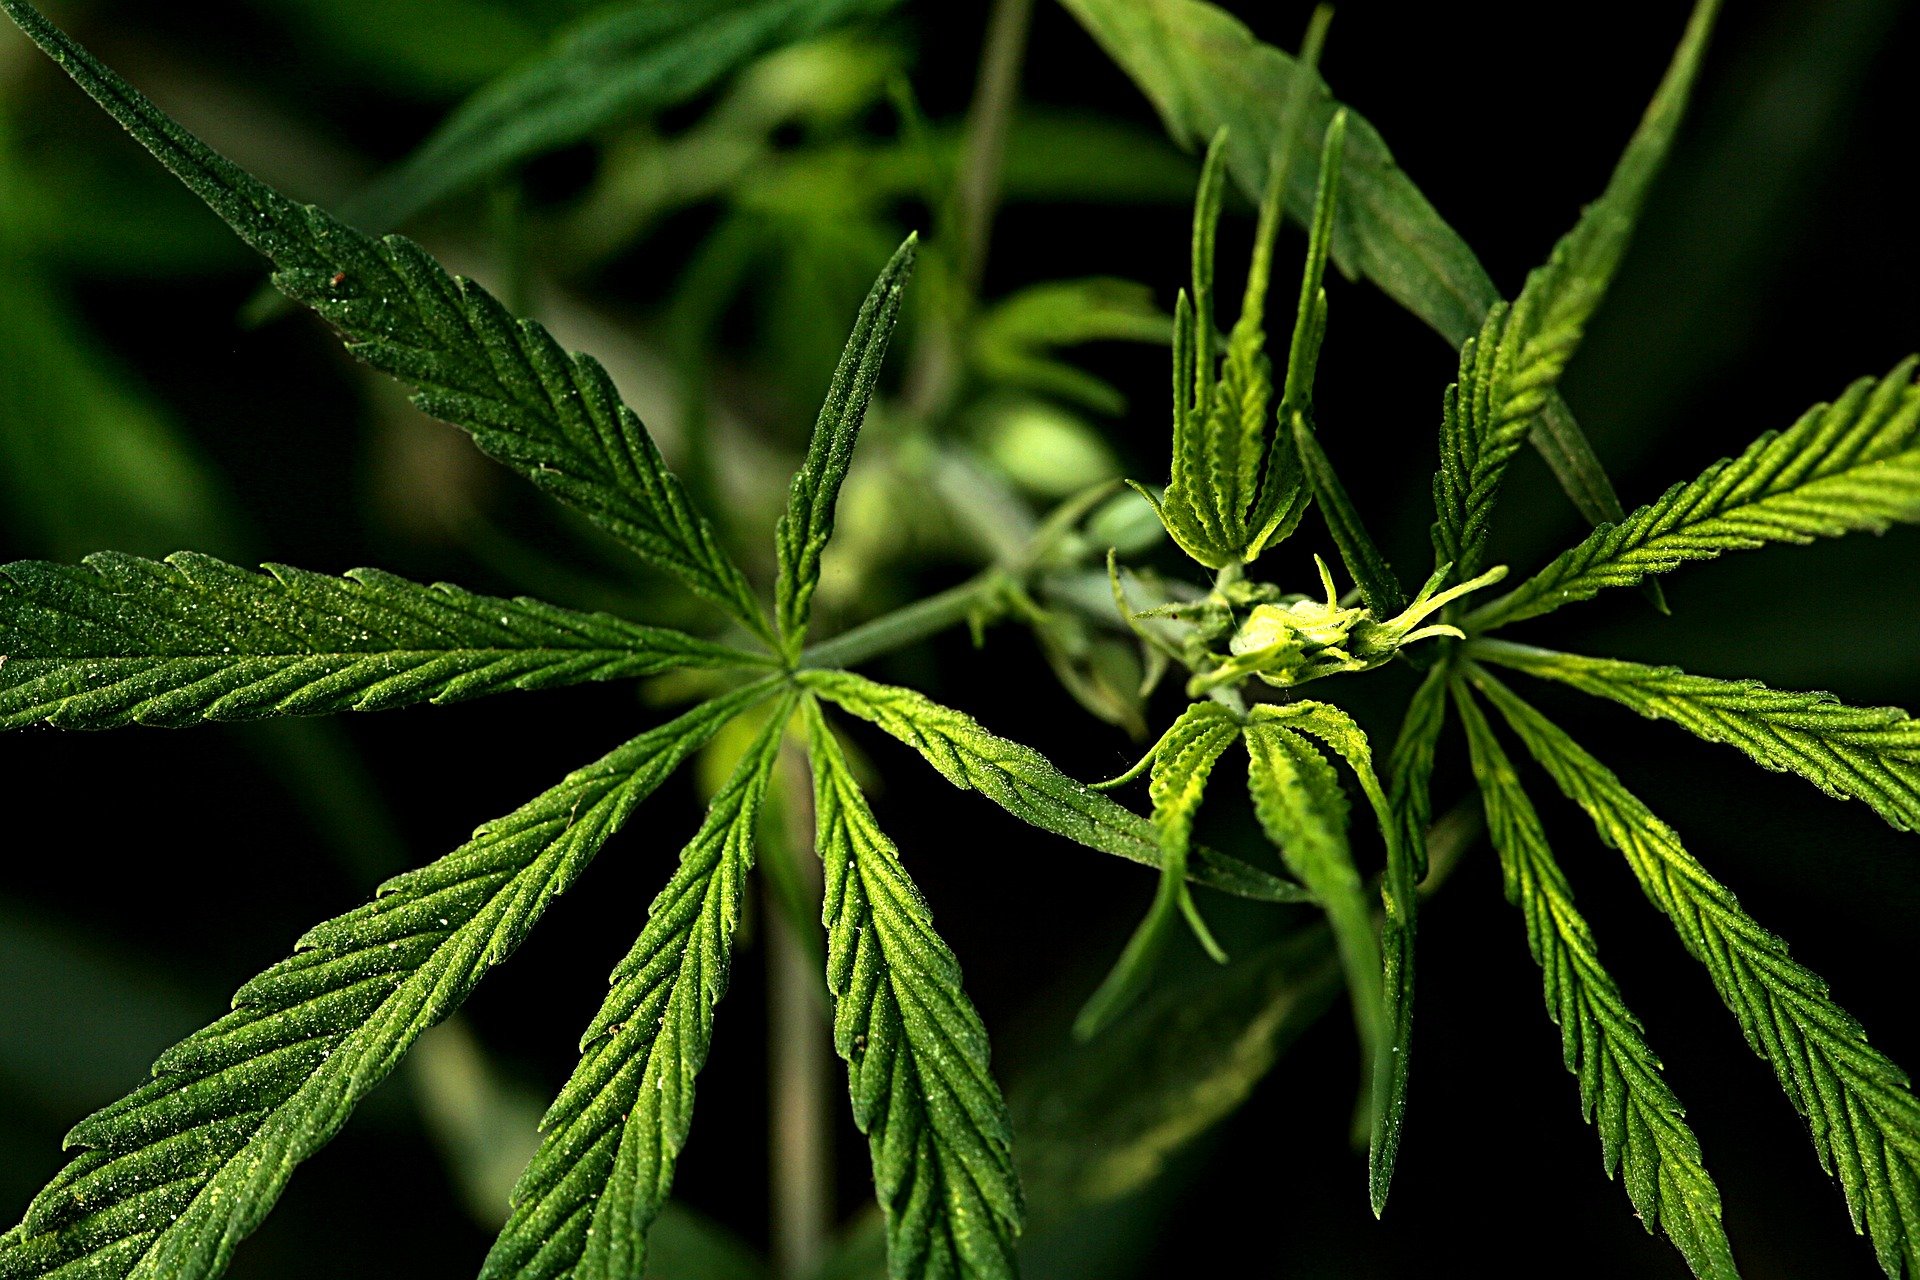 Ask the Expert: Medical Marijuana and Workplace Safety